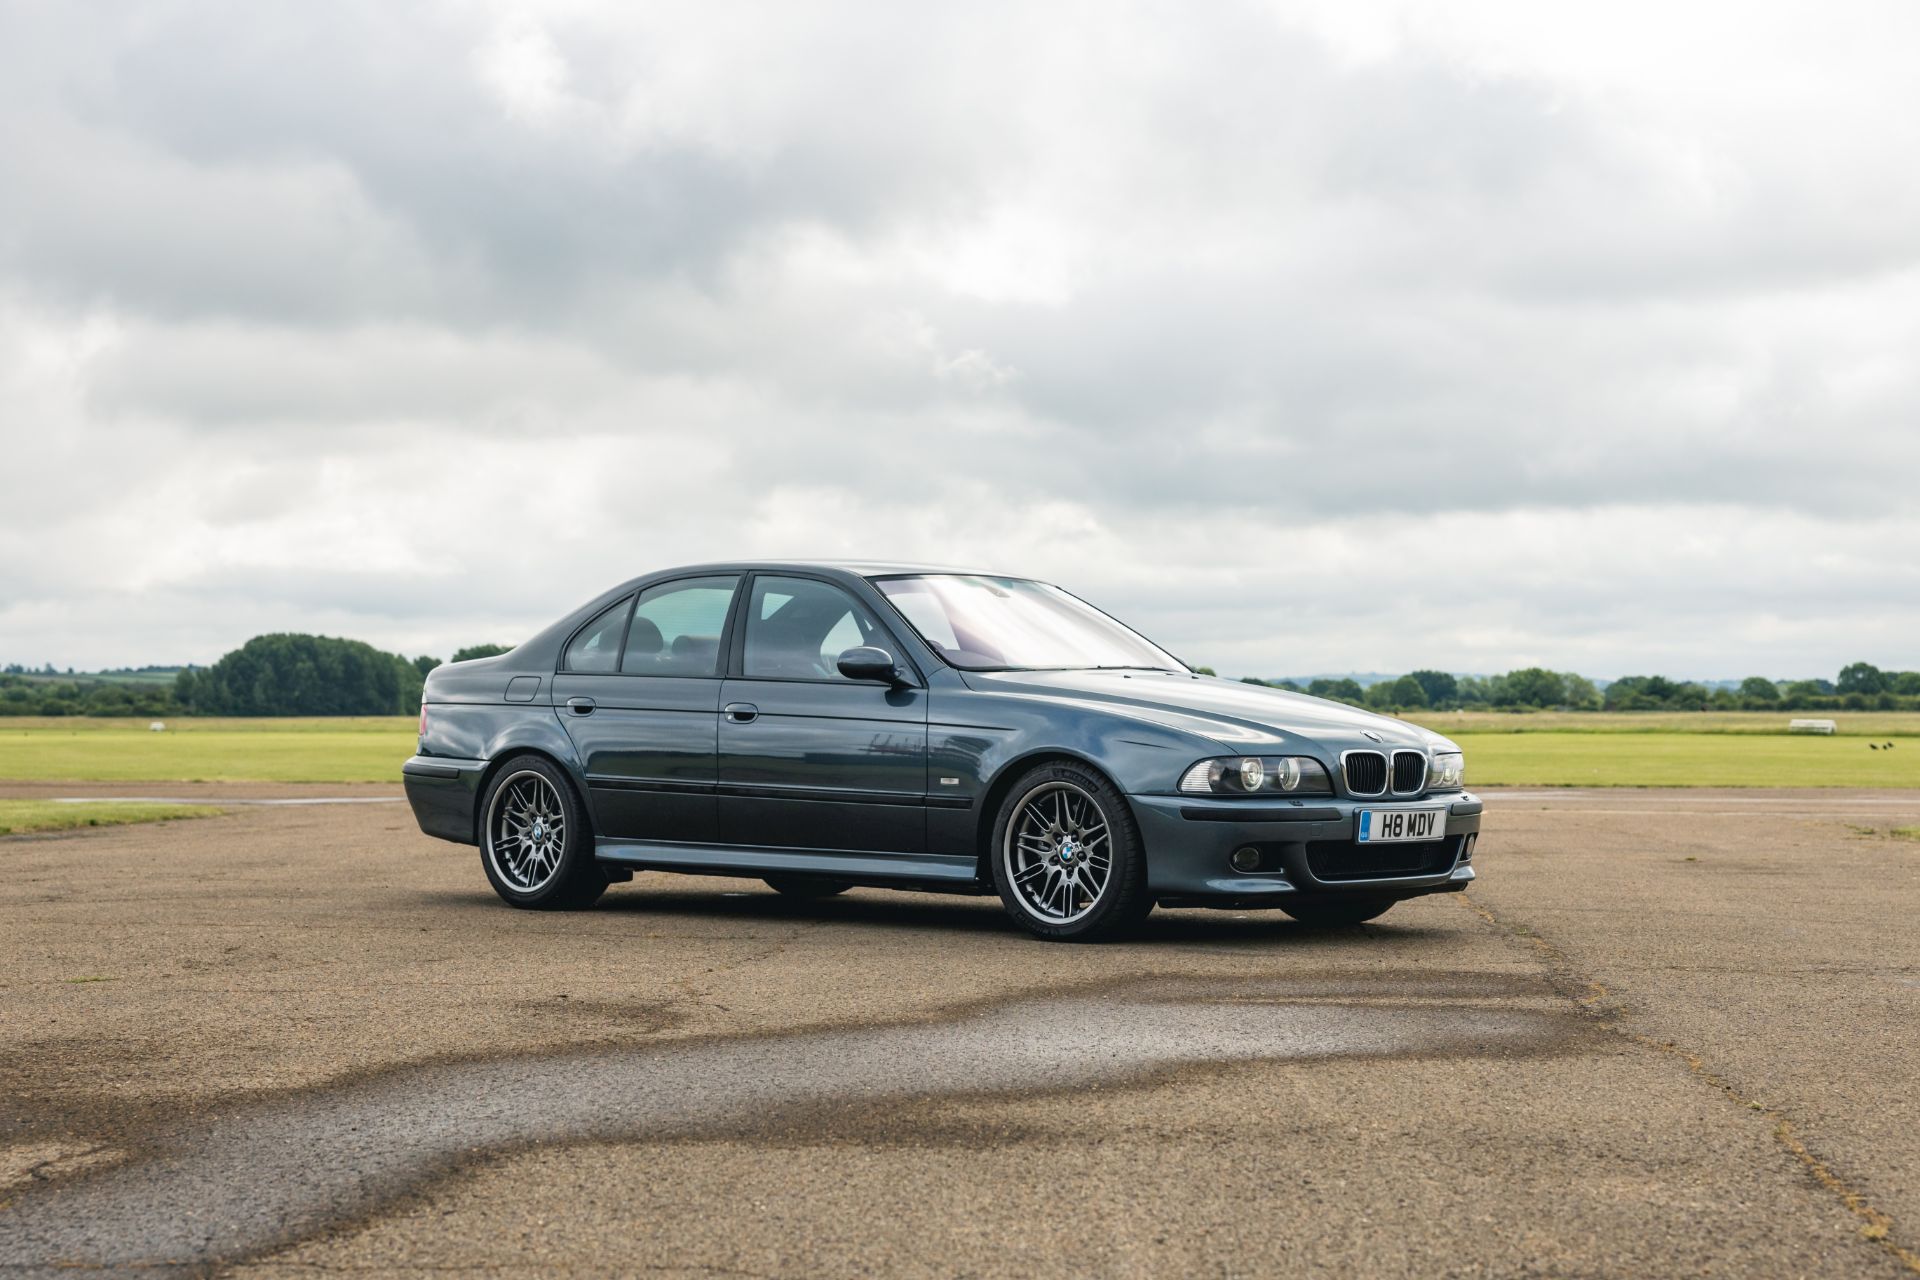 1999 BMW M5 (E39) Sports Saloon Chassis no. WBSDE92020BJ10095